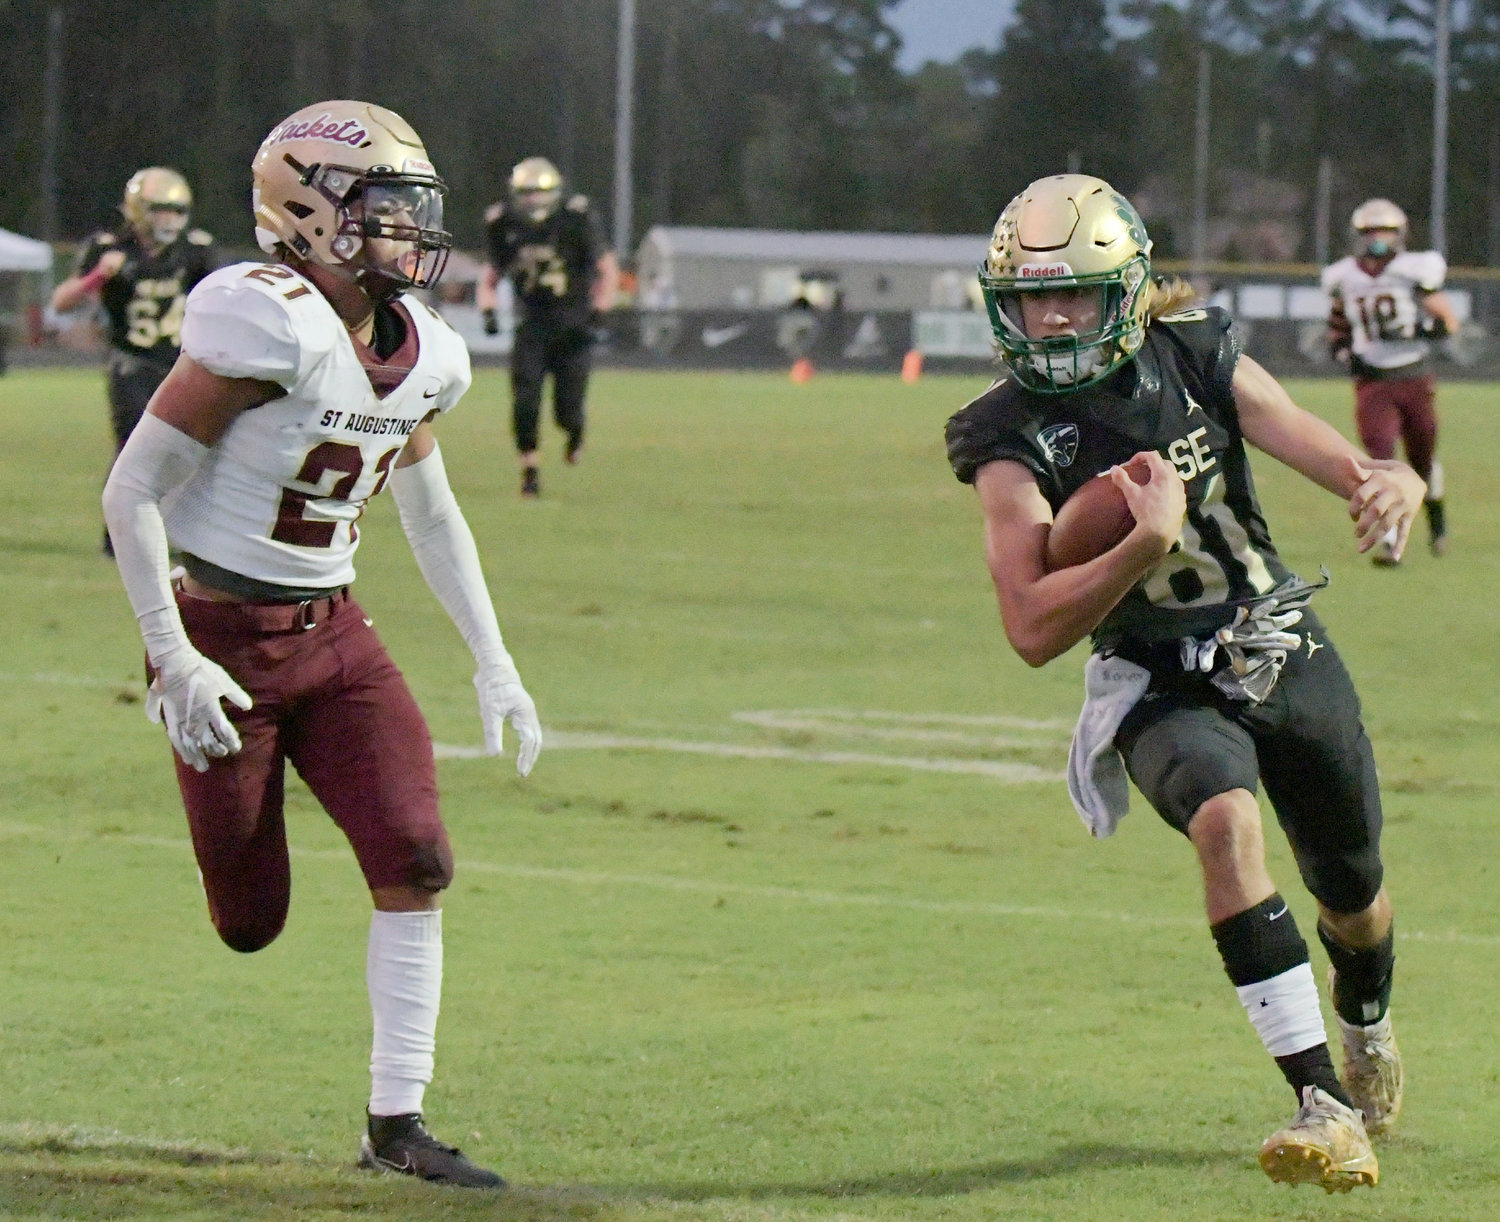 Gavin Gmeiner opened the Panthers’ scoring on the night with a touchdown reception.